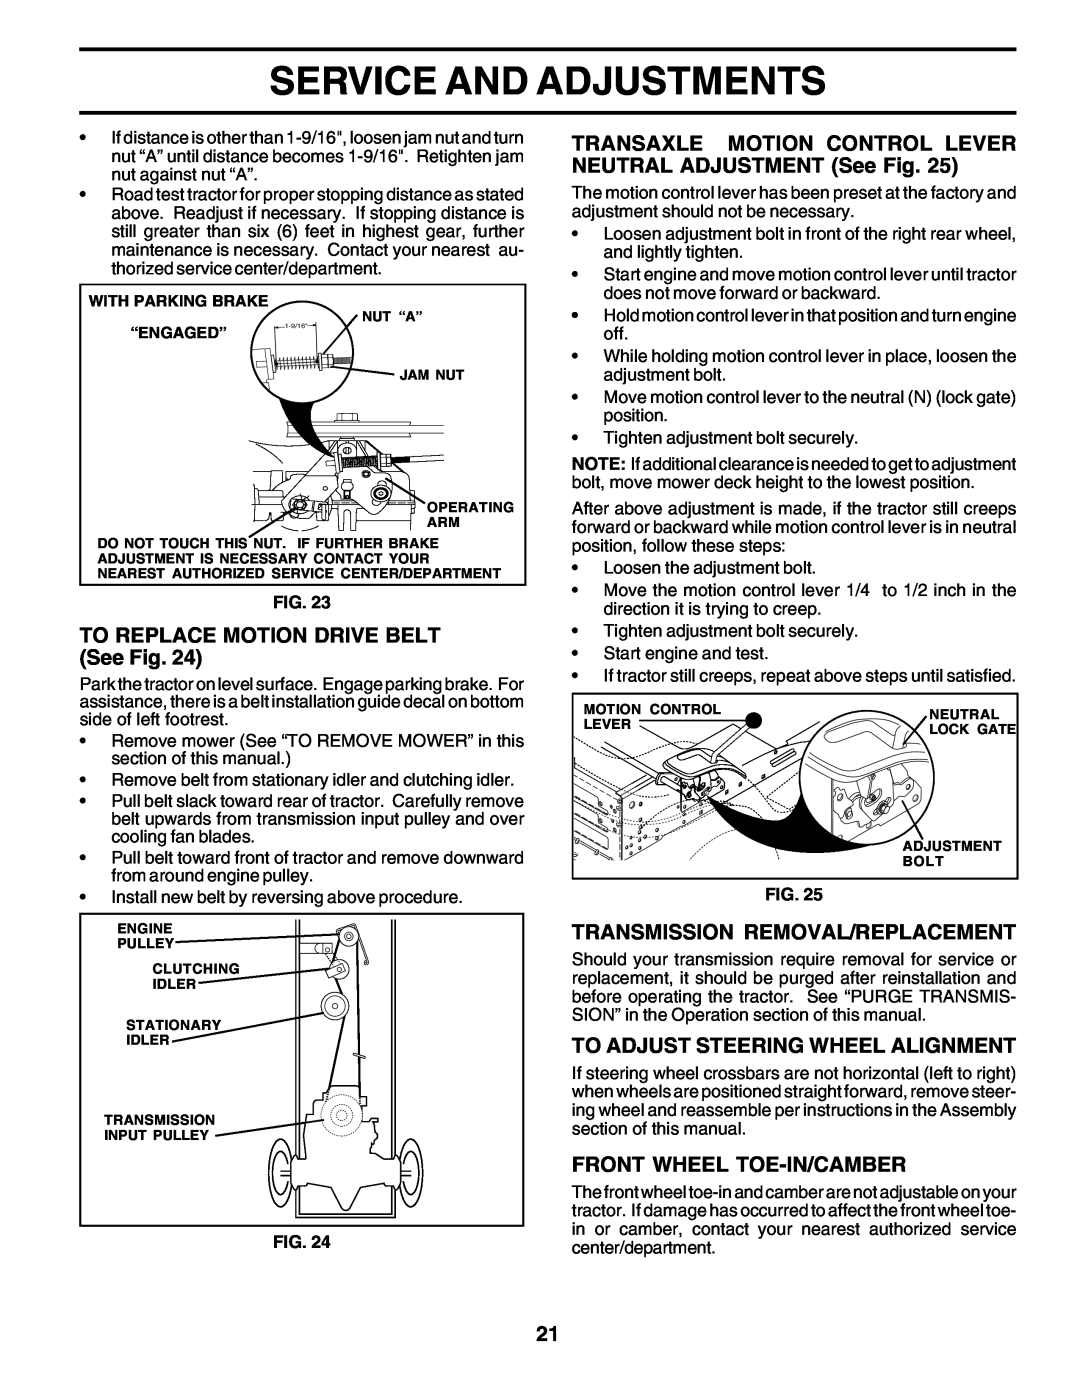 Poulan 178379 owner manual TRANSAXLE MOTION CONTROL LEVER NEUTRAL ADJUSTMENT See Fig, TO REPLACE MOTION DRIVE BELT See Fig 